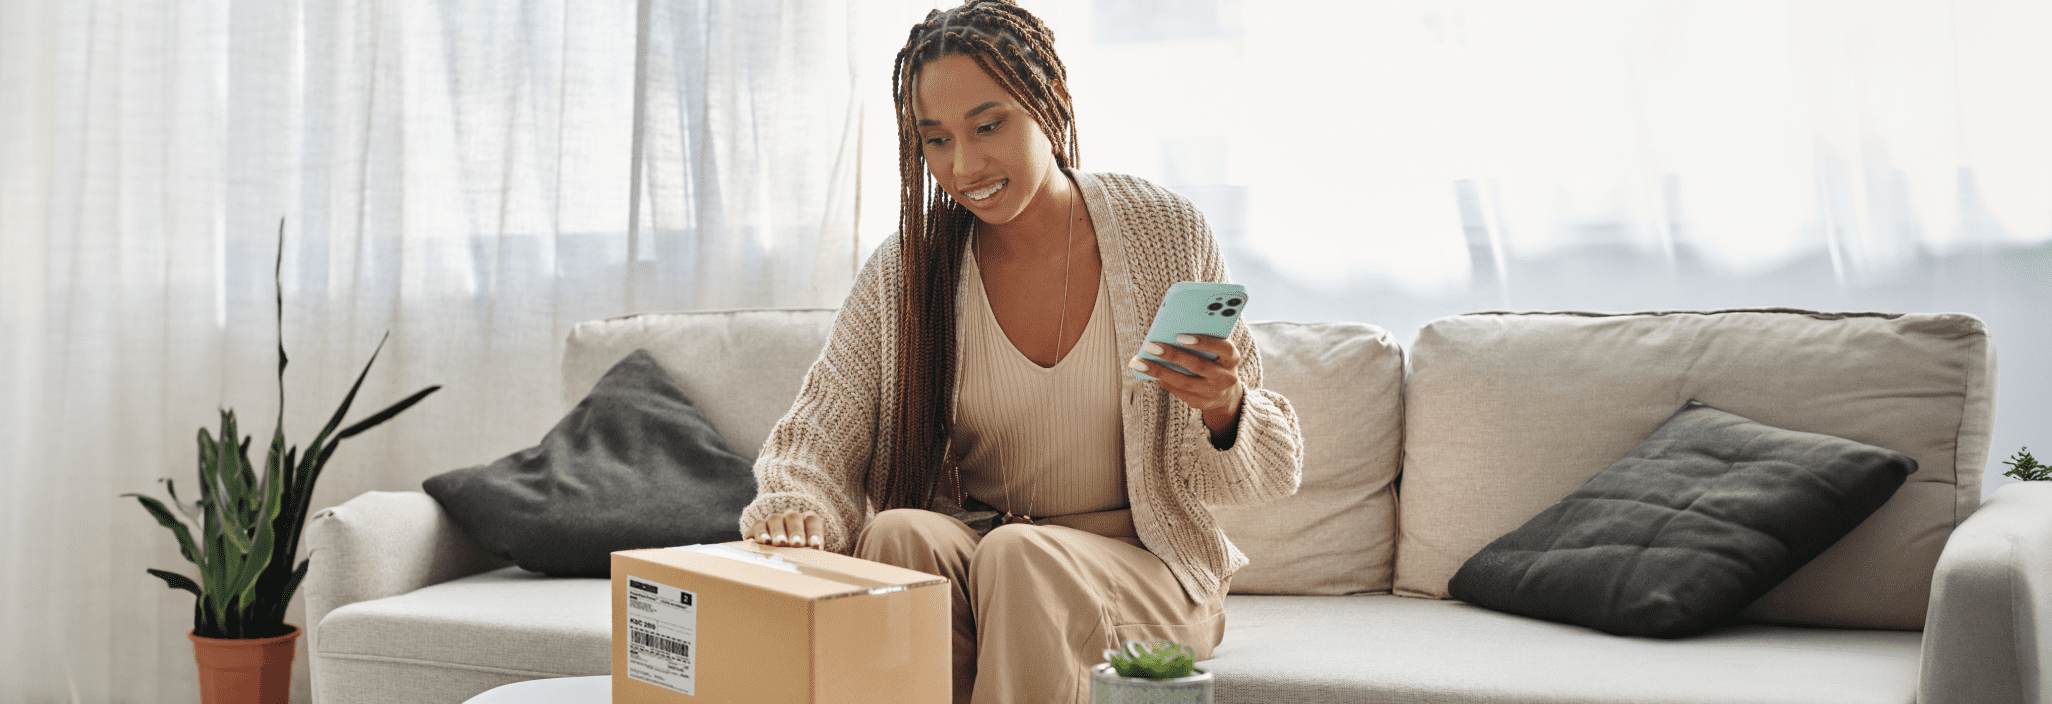 A smiling woman looks at her smart phone as she holds a package.